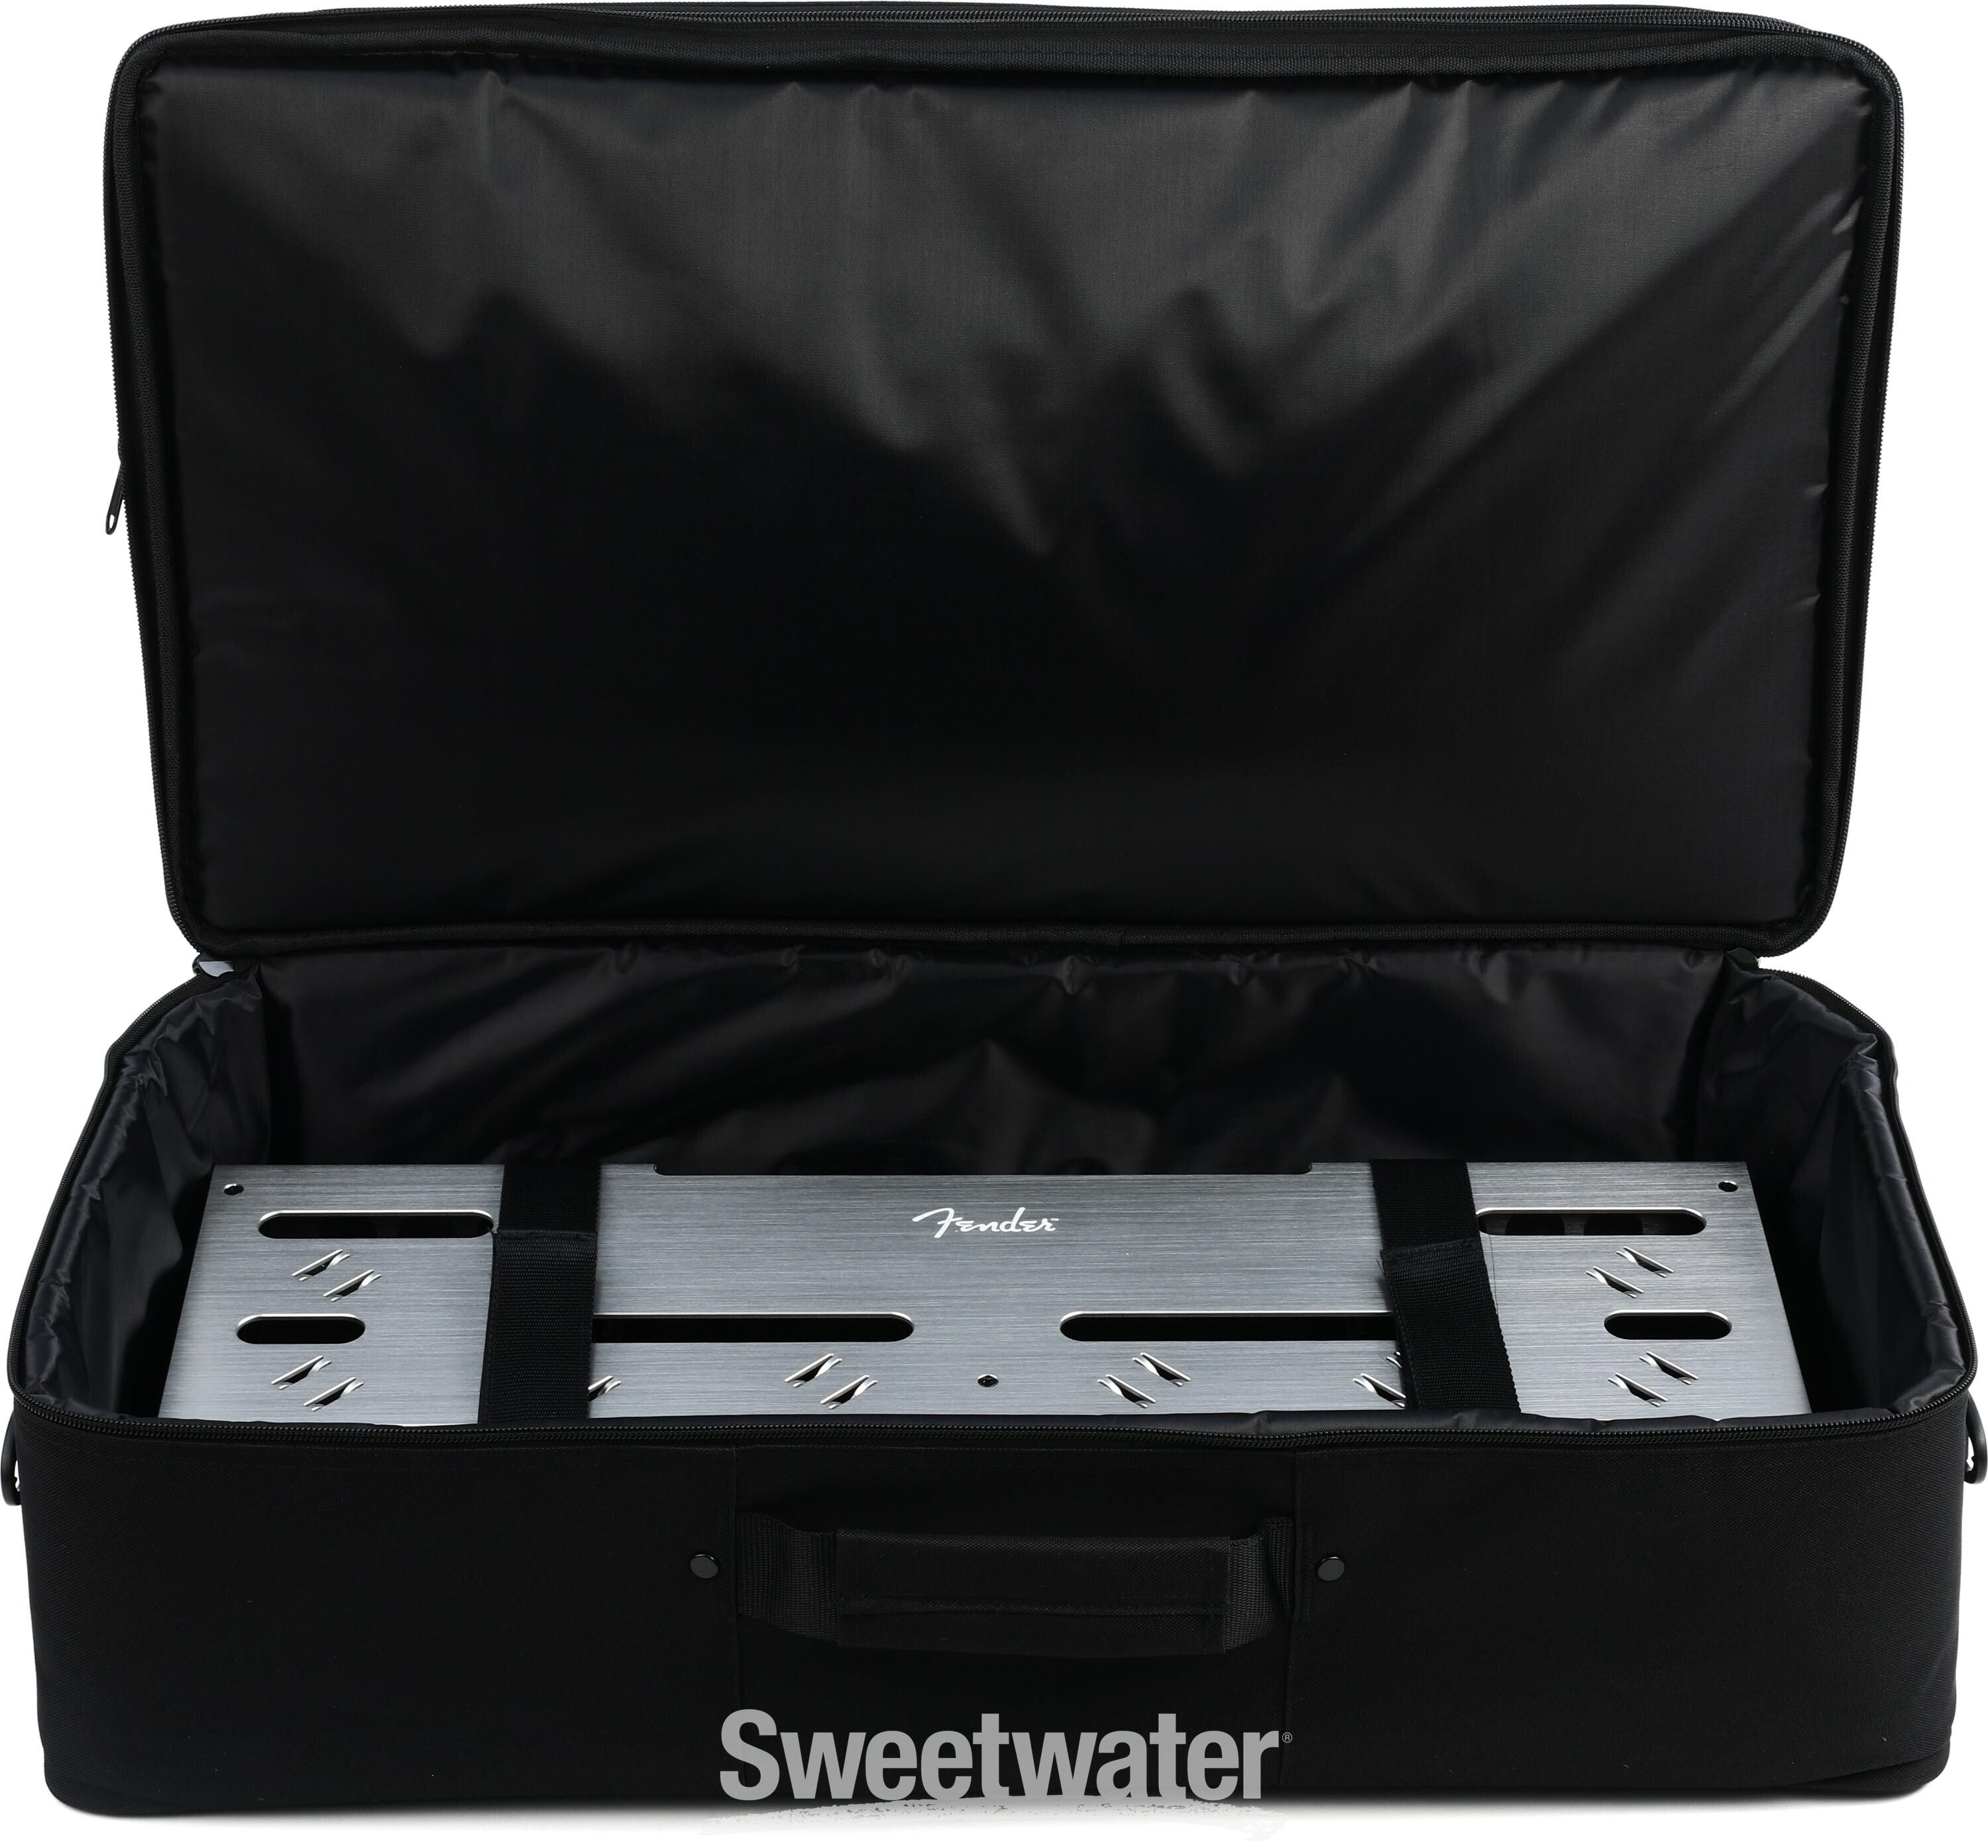 Fender Professional Pedalboard with Bag - Medium | Sweetwater